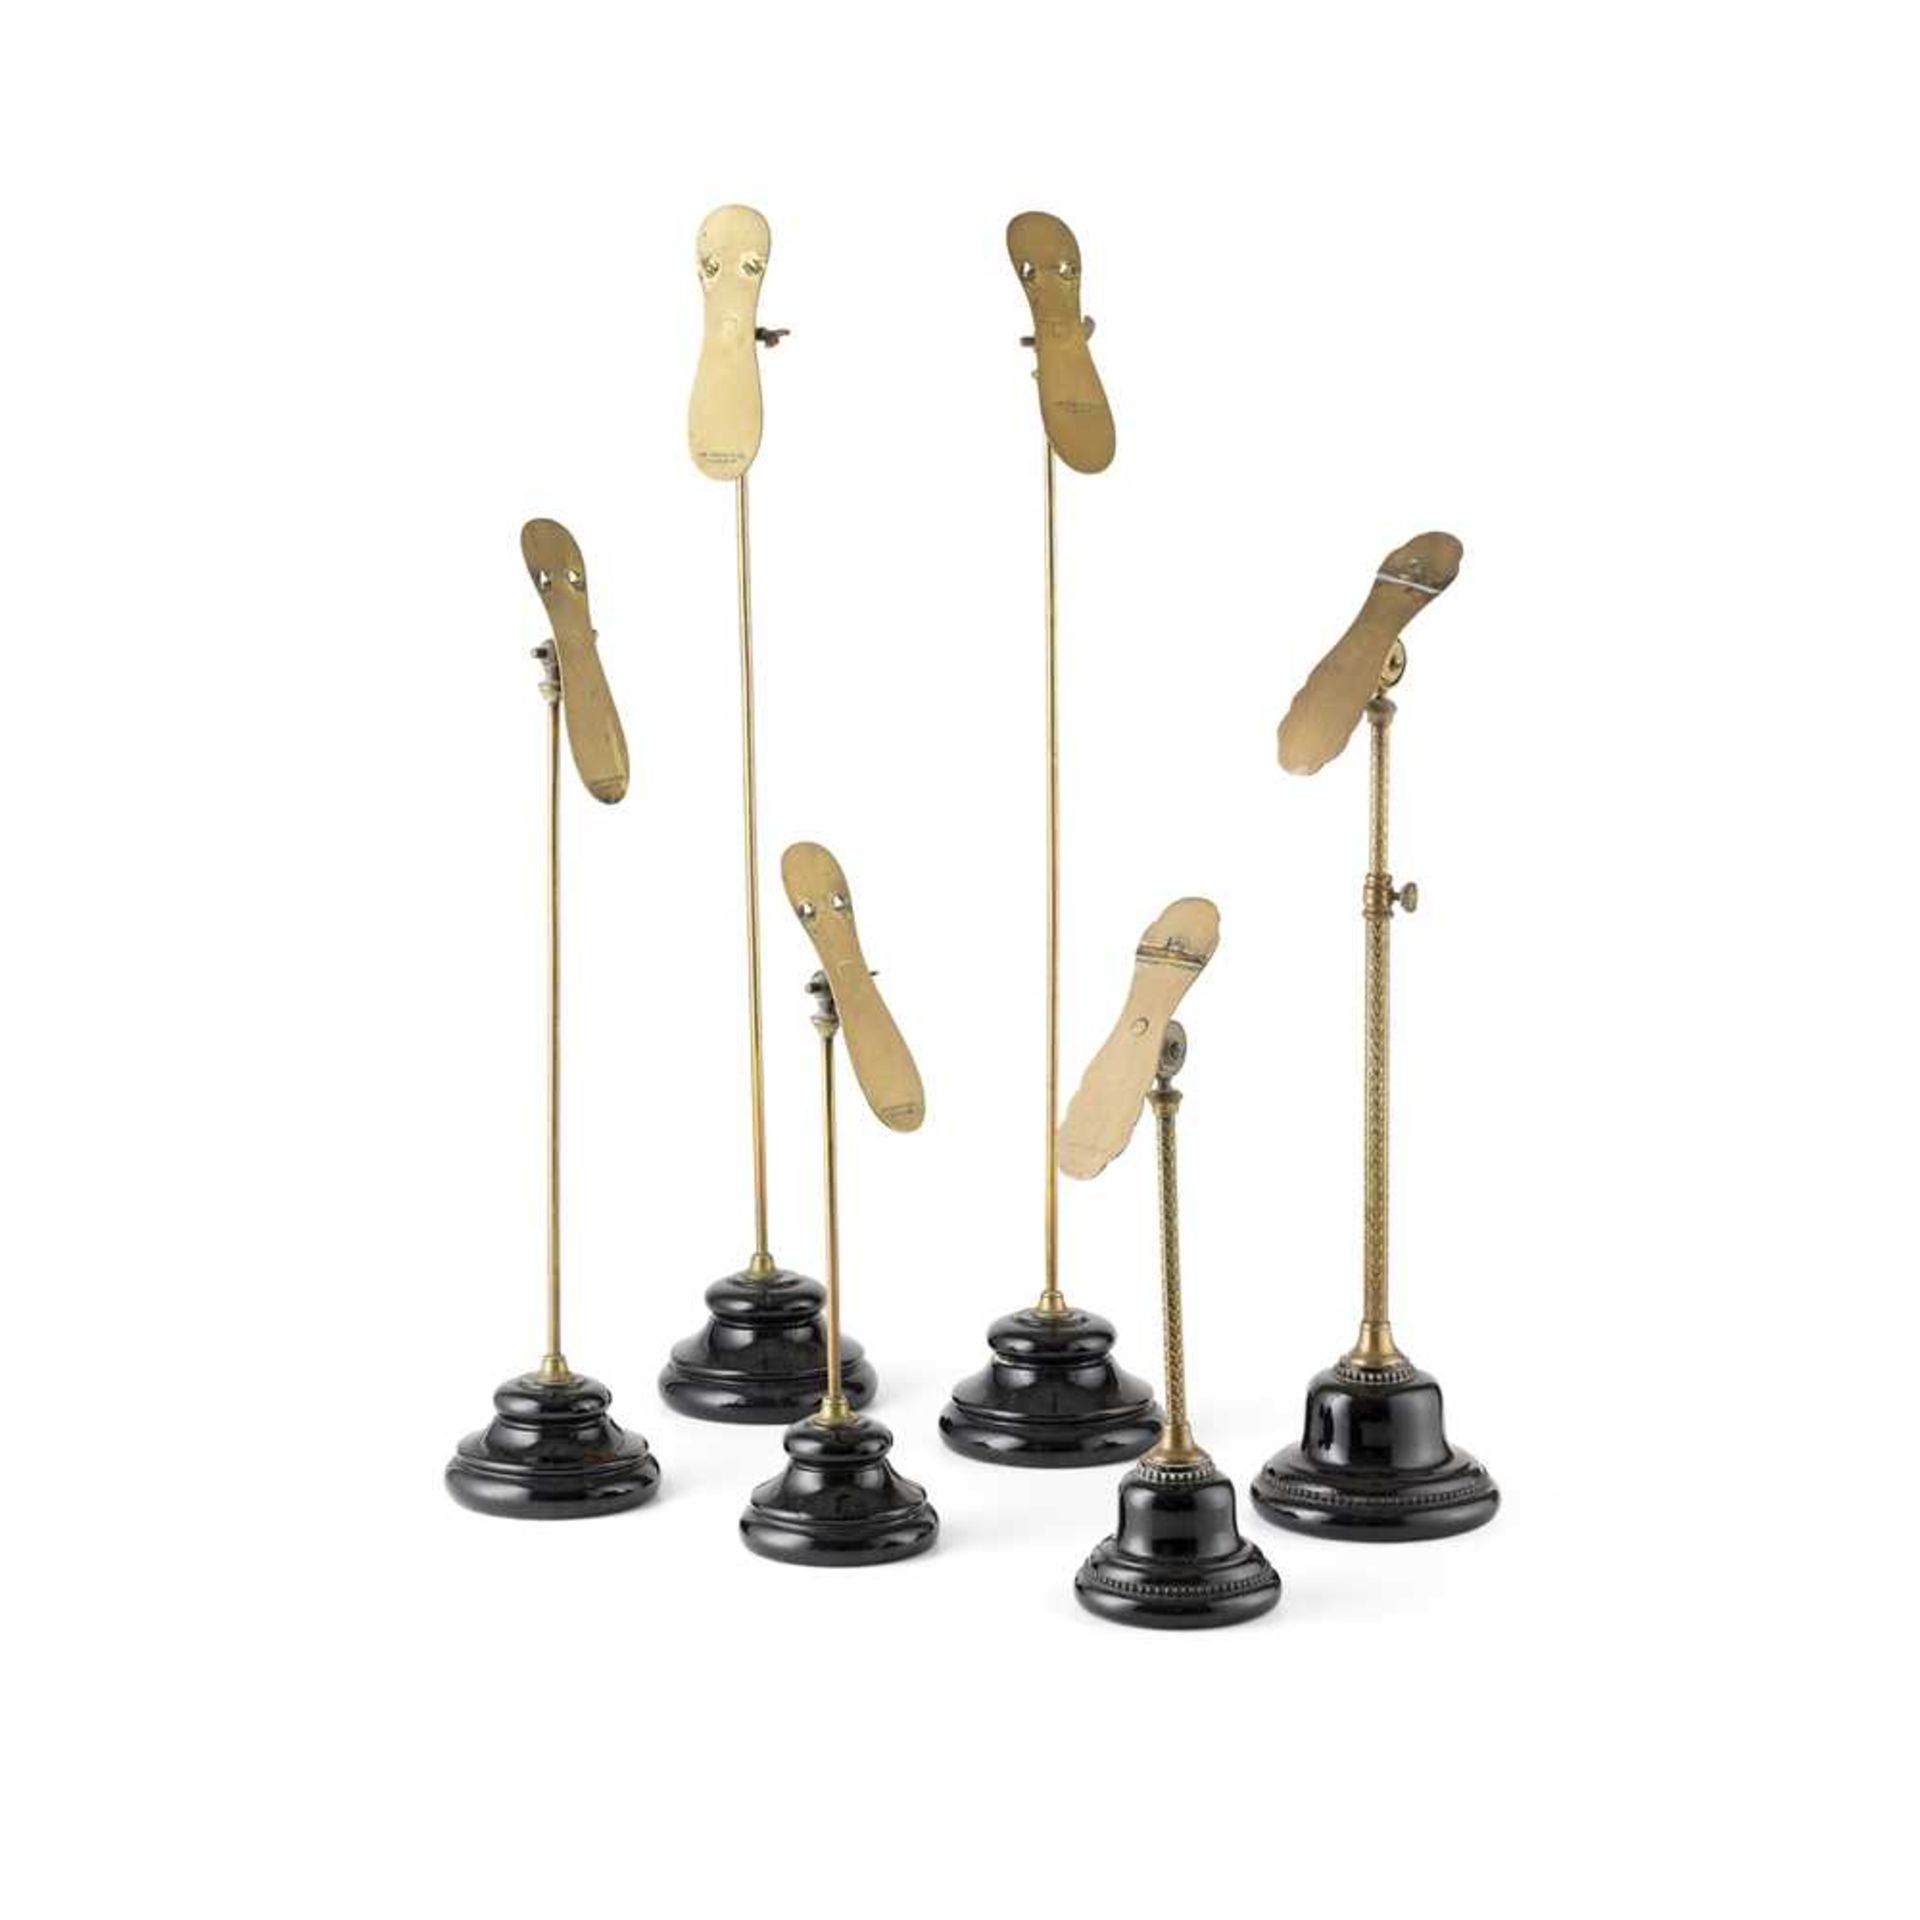 GROUP OF BRASS AND POTTERY SHOE DISPLAY STANDS LATE 19TH/ EARLY 20TH CENTURY